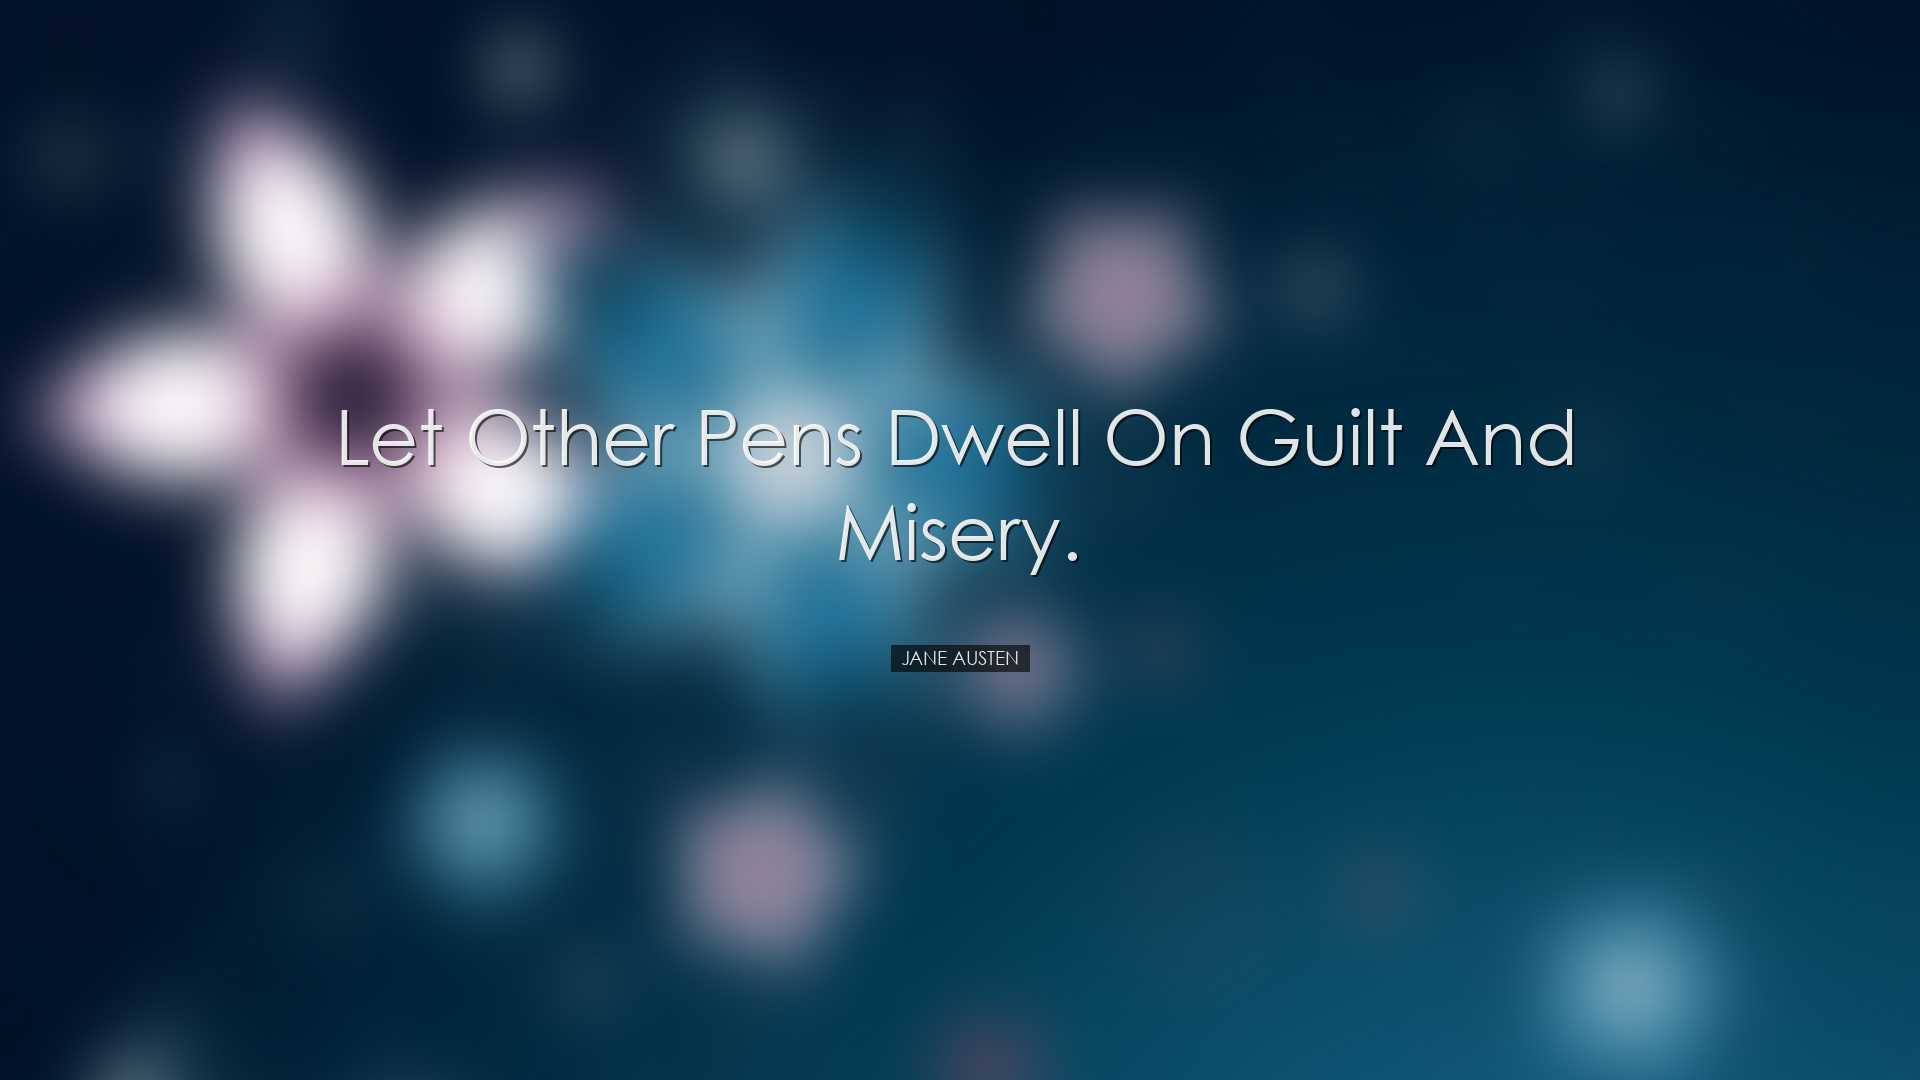 Let other pens dwell on guilt and misery. - Jane Austen